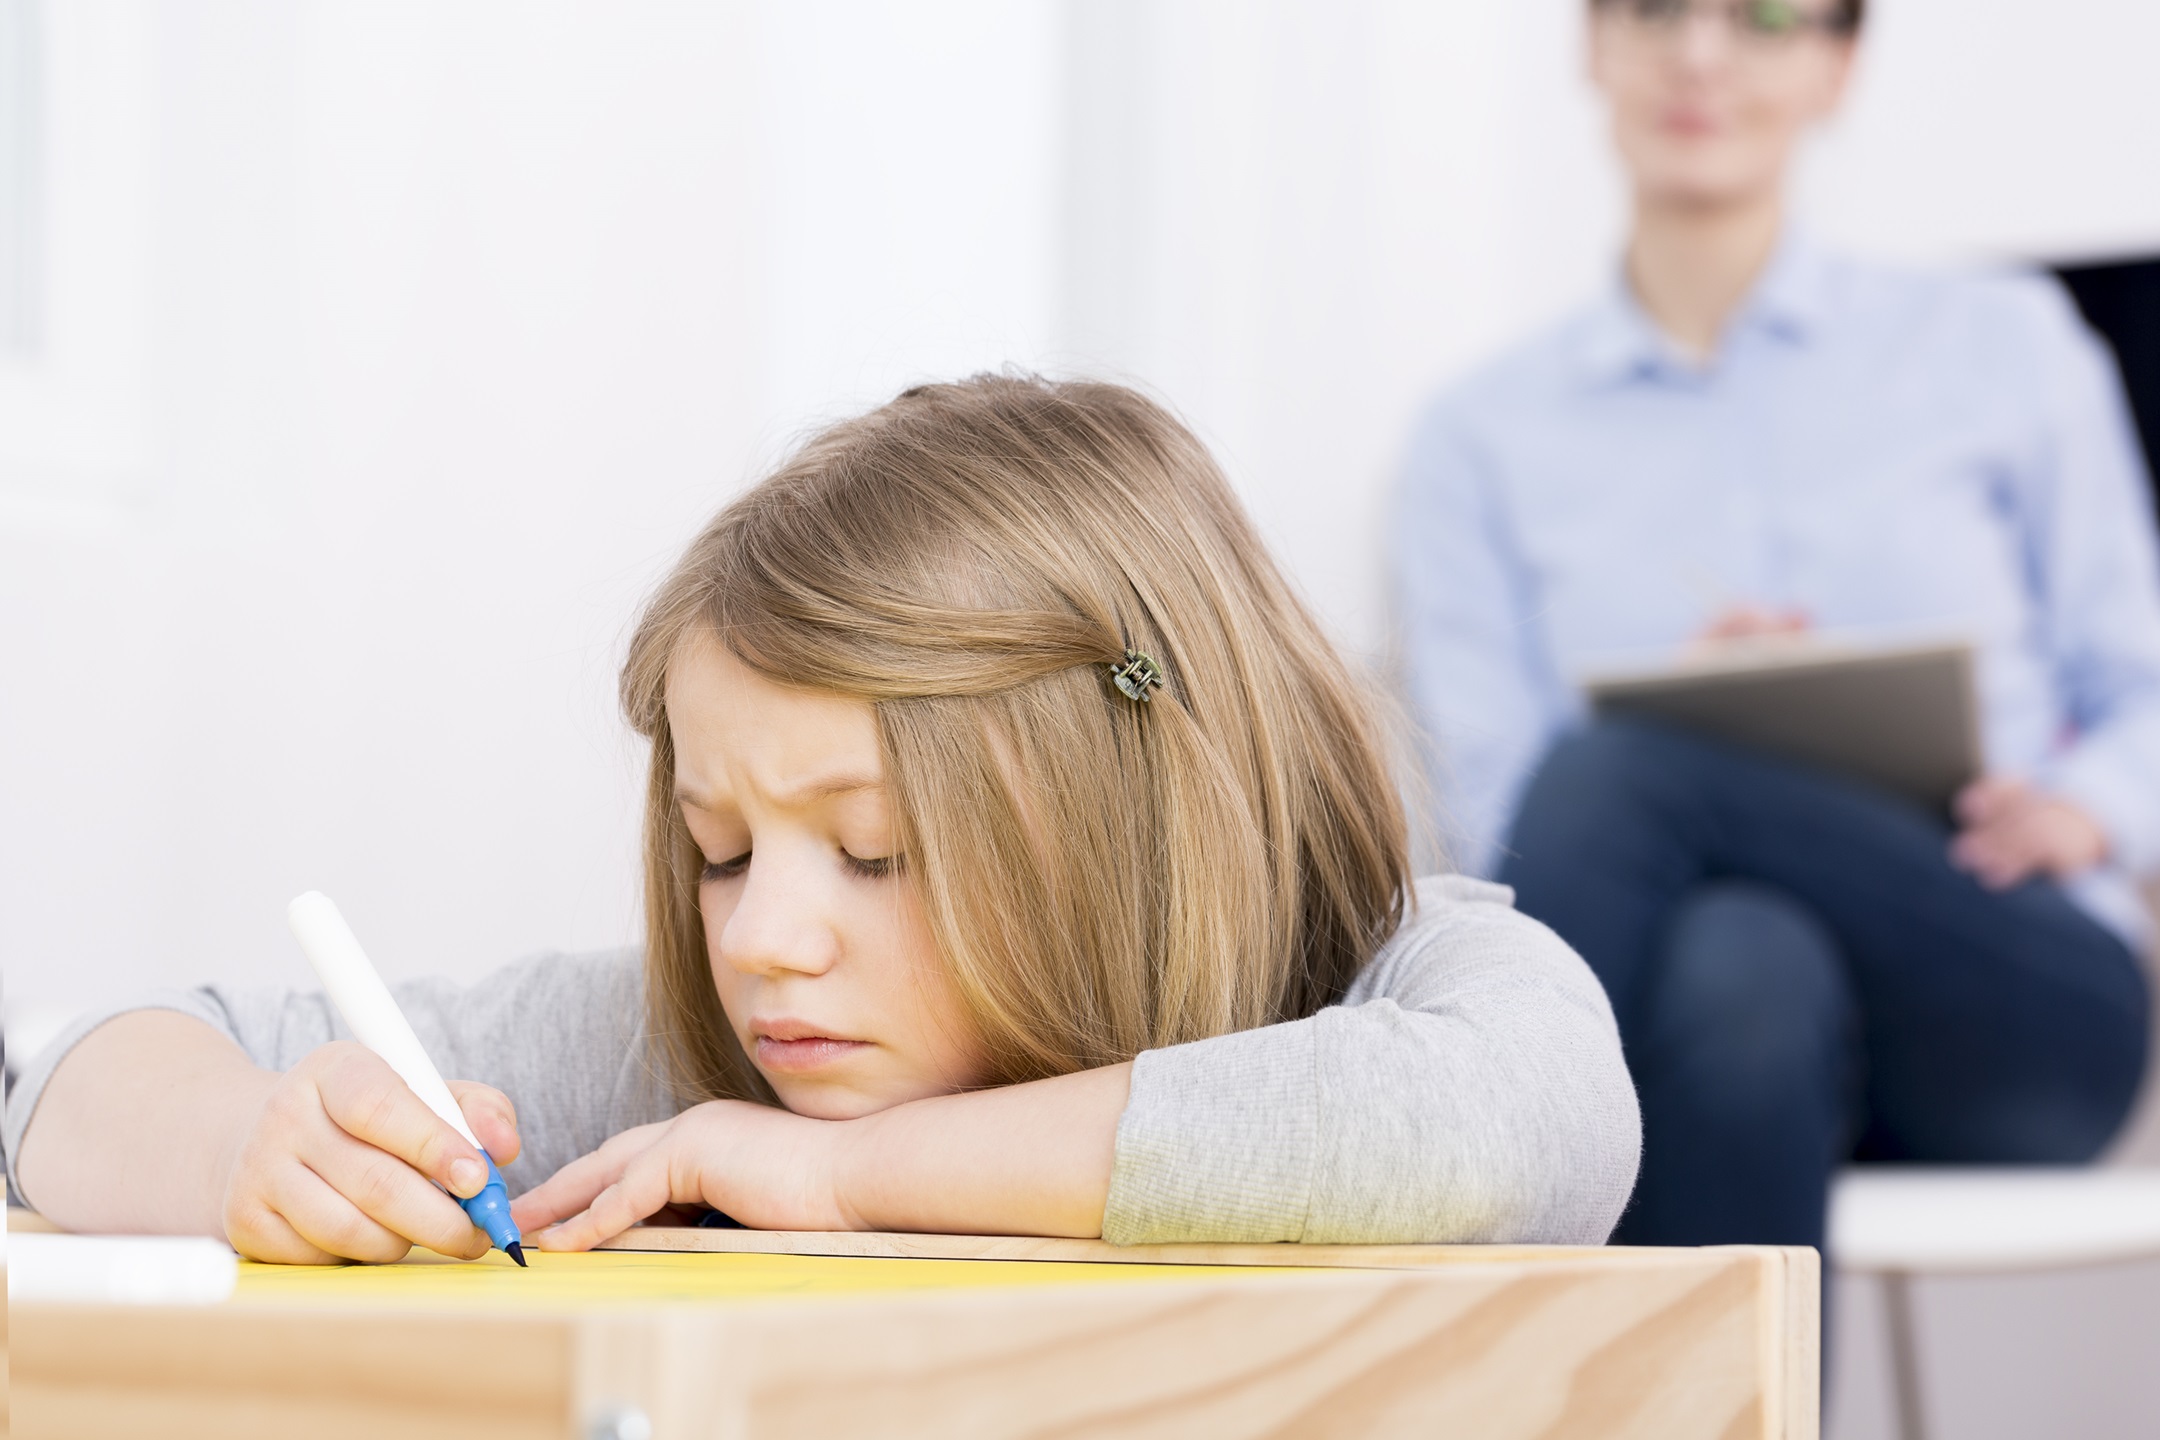 Dr David Mather | A Promising Approach to Prevent Children from Developing Dyslexia